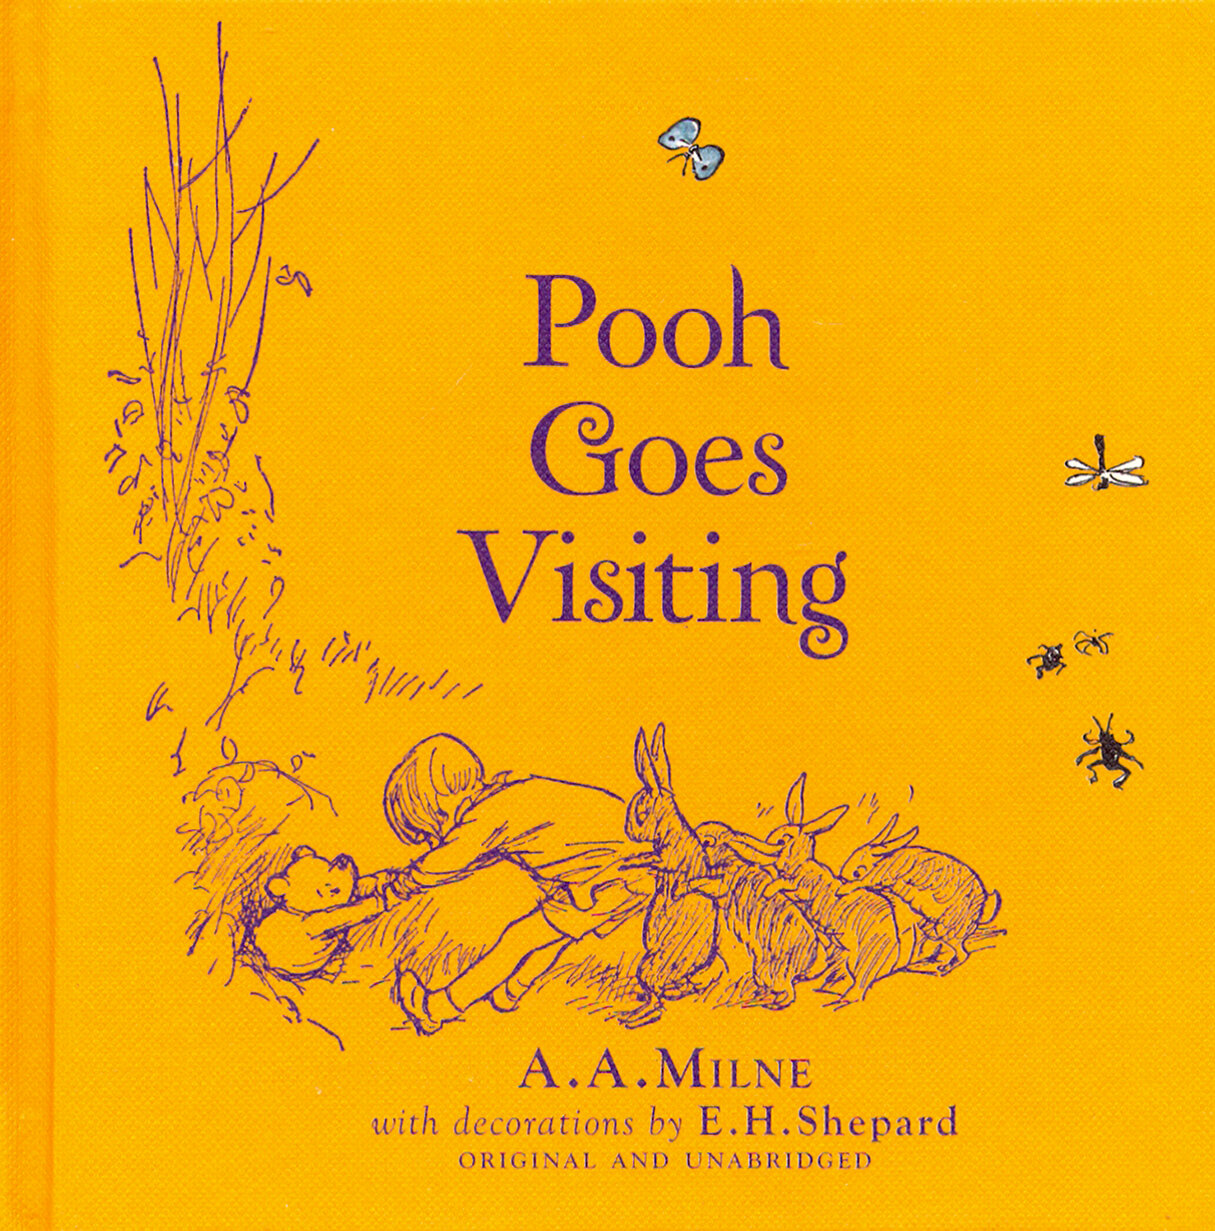 Winnie-the-Pooh. Pooh Goes Visiting | Milne A. A.